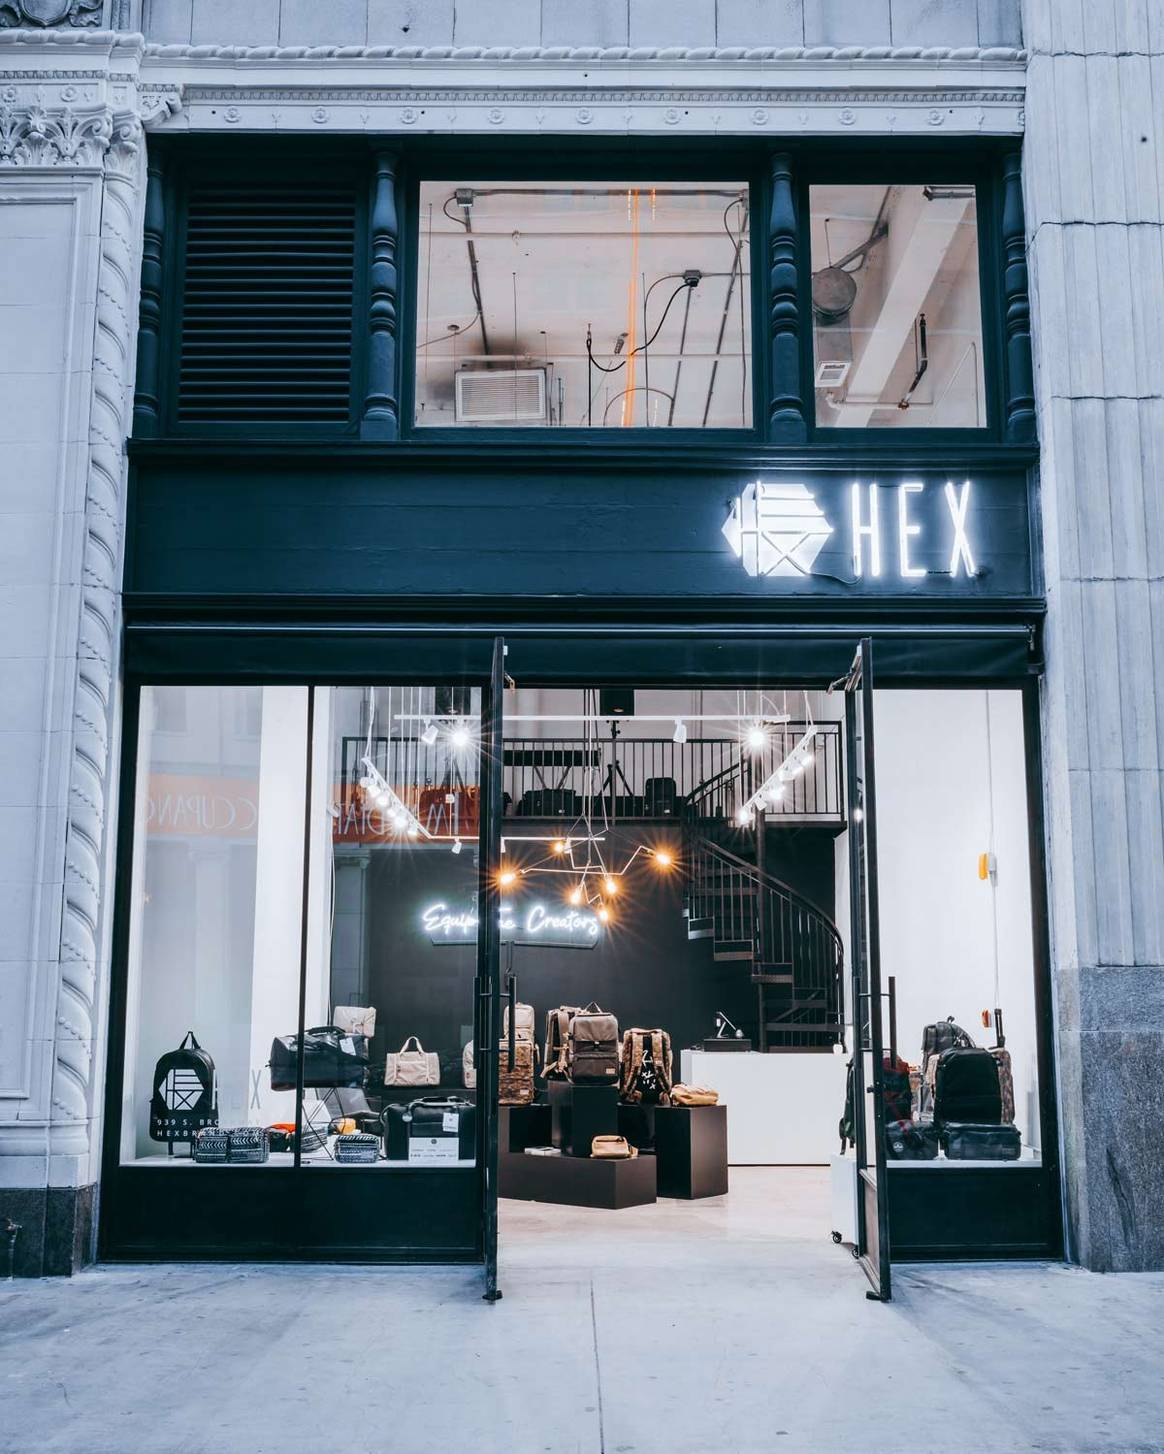 Accessories brand Hex opens flagship store in downtown L.A.